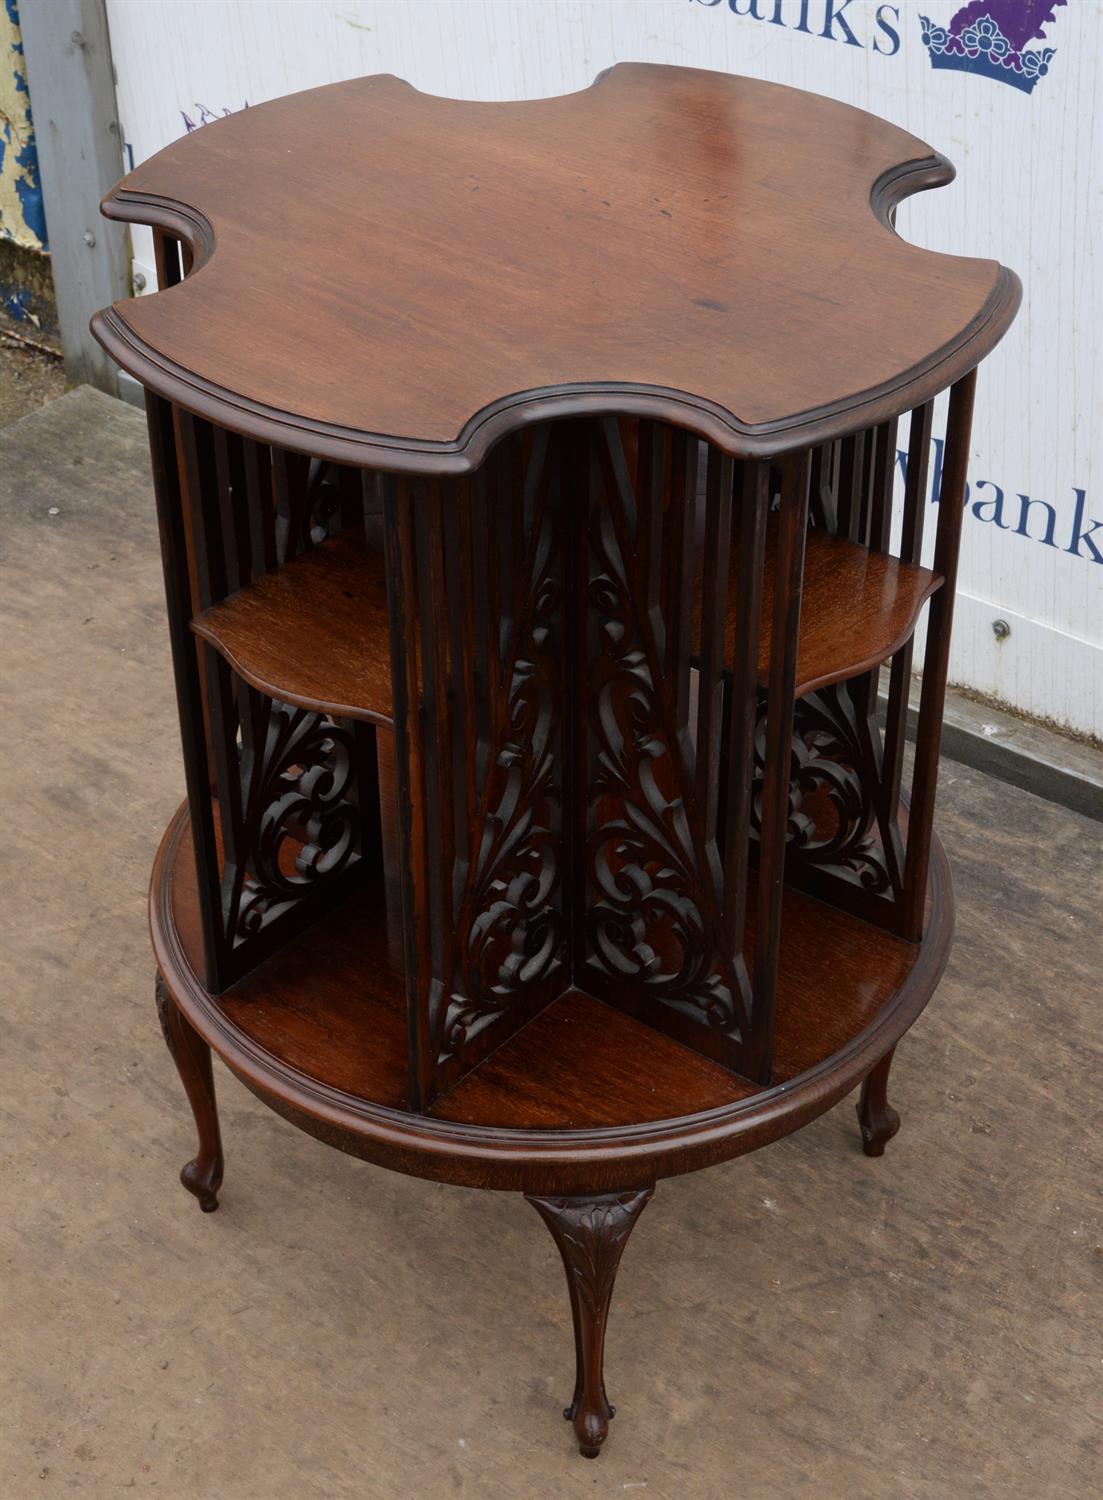 An Edwardian revolving bookcase - Image 2 of 3